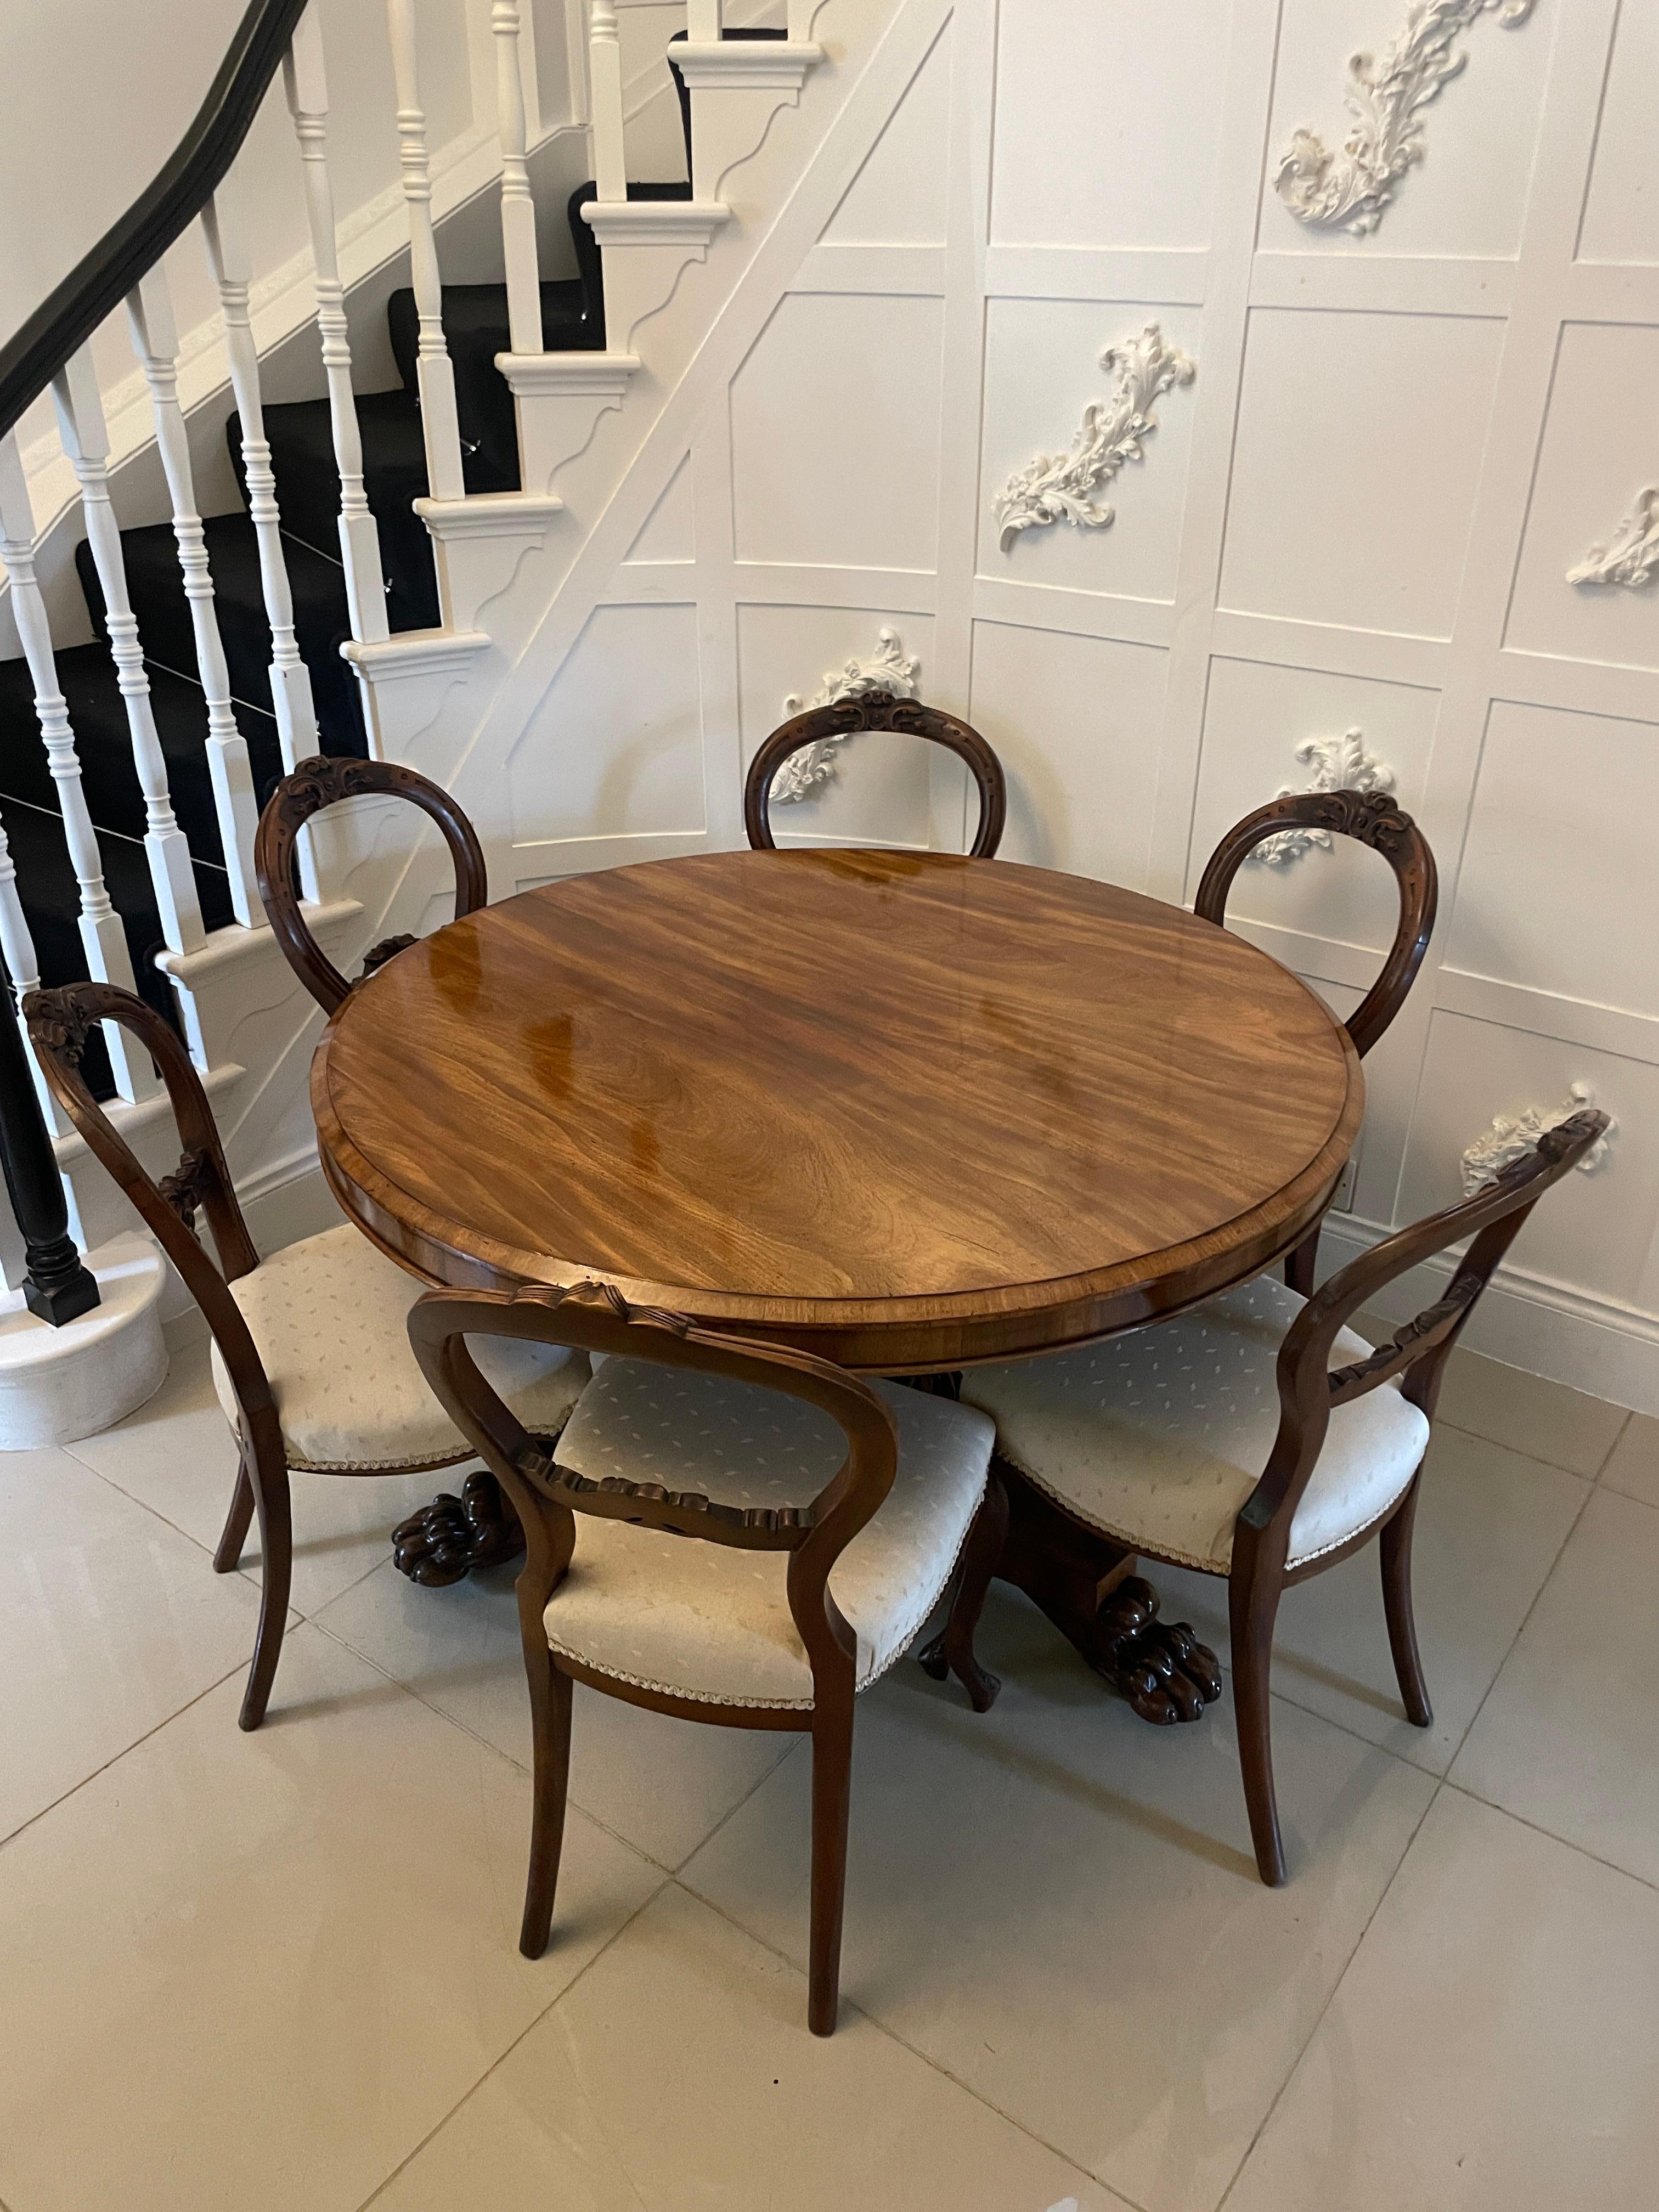 Antique Victorian quality figured mahogany 6 seater dining table having a quality figured mahogany circular top with a moulded edge supported by a mahogany shaped pedestal column with a circular moulded collar standing on a platform base with